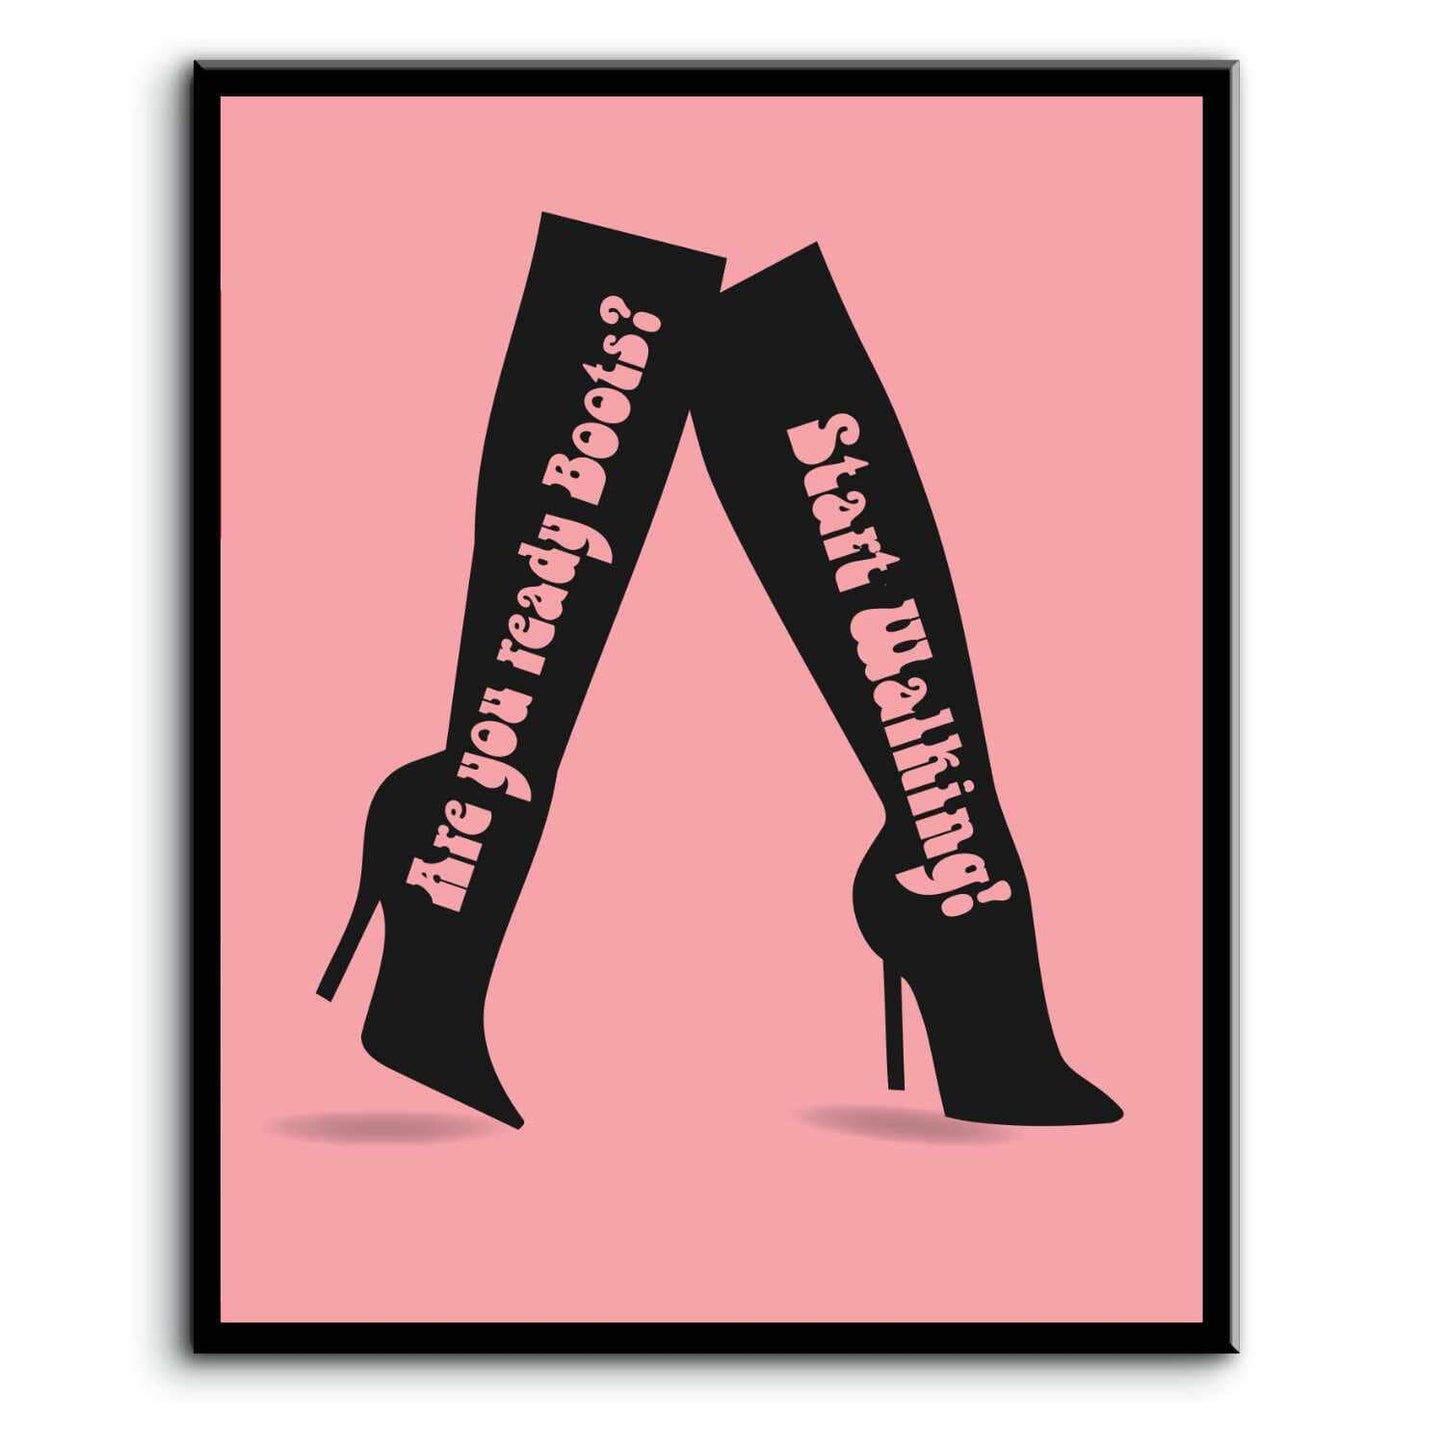 These Boots Are Made for Walkin' by Nancy Sinatra - 60s Art Song Lyrics Art Song Lyrics Art 8x10 Plaque Mount 